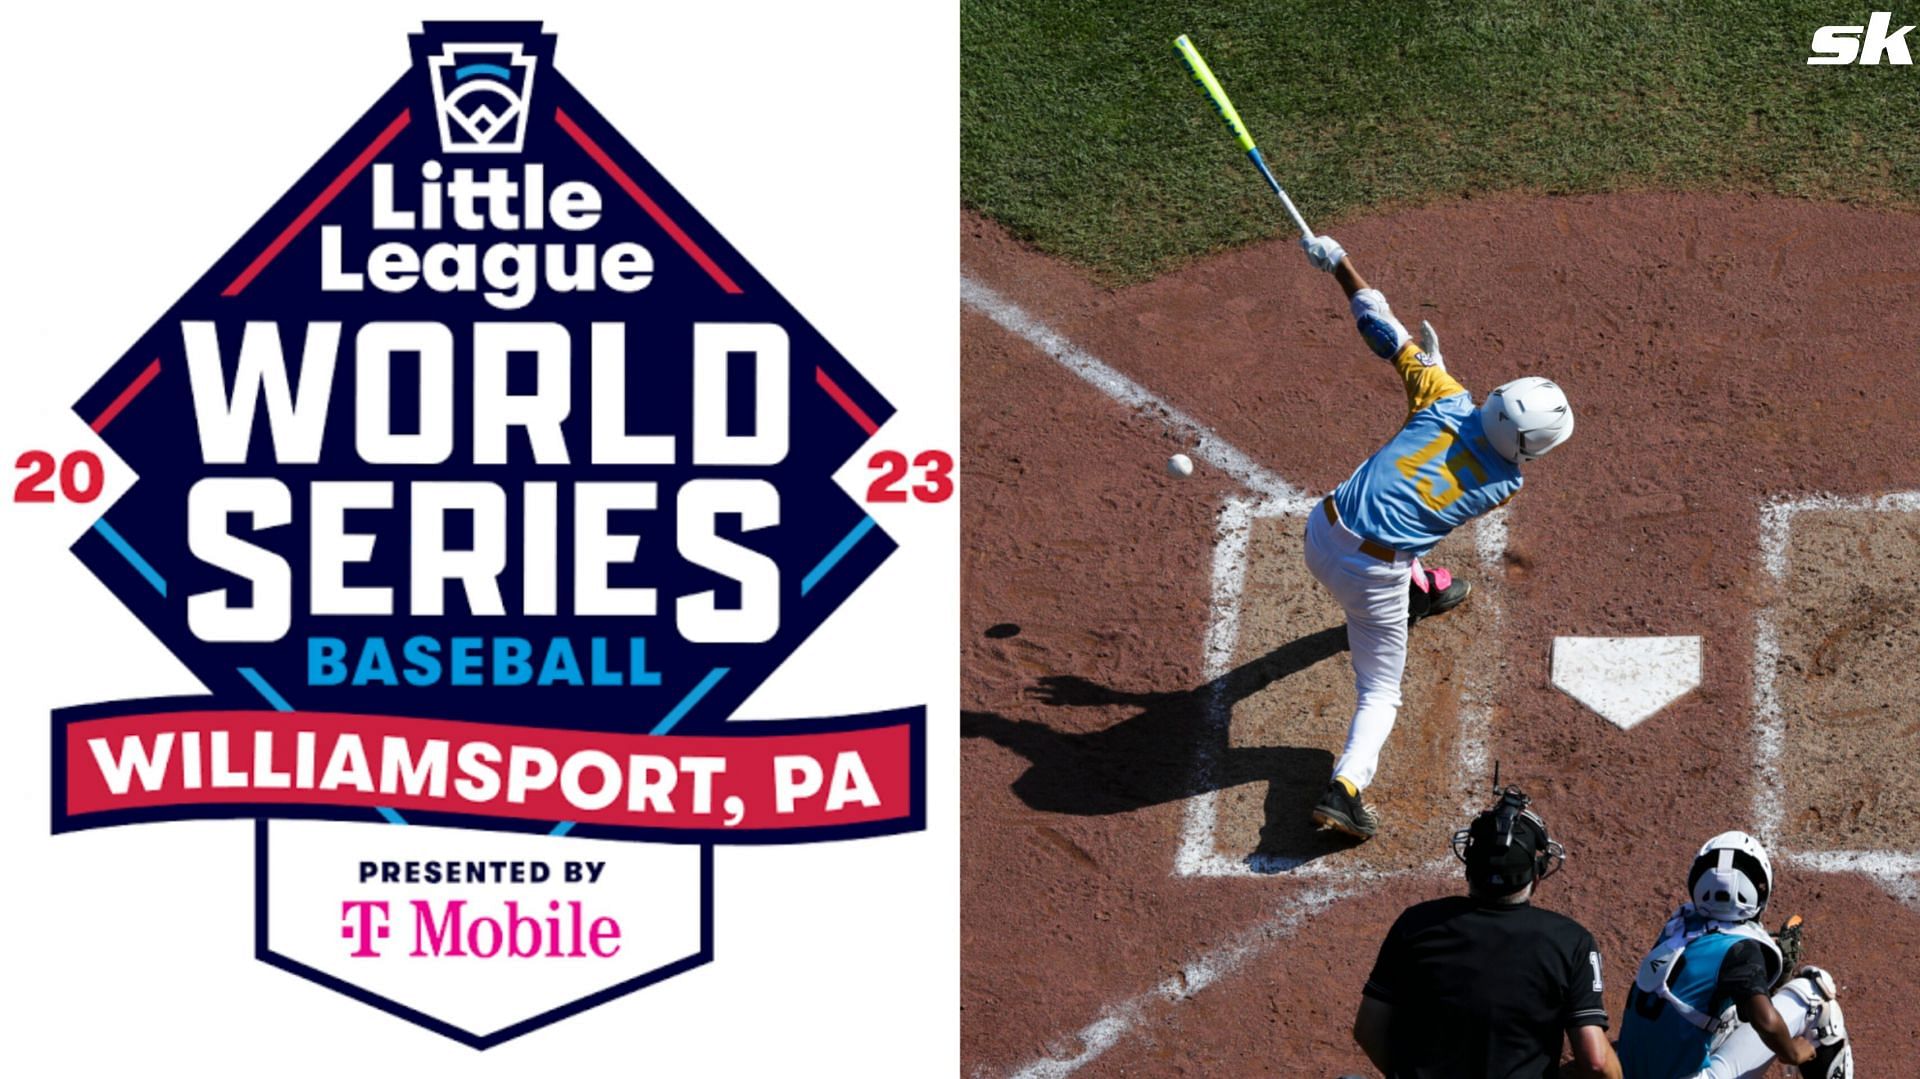 ESPN Plans Full Day of Coverage Culminating with MLB Little League